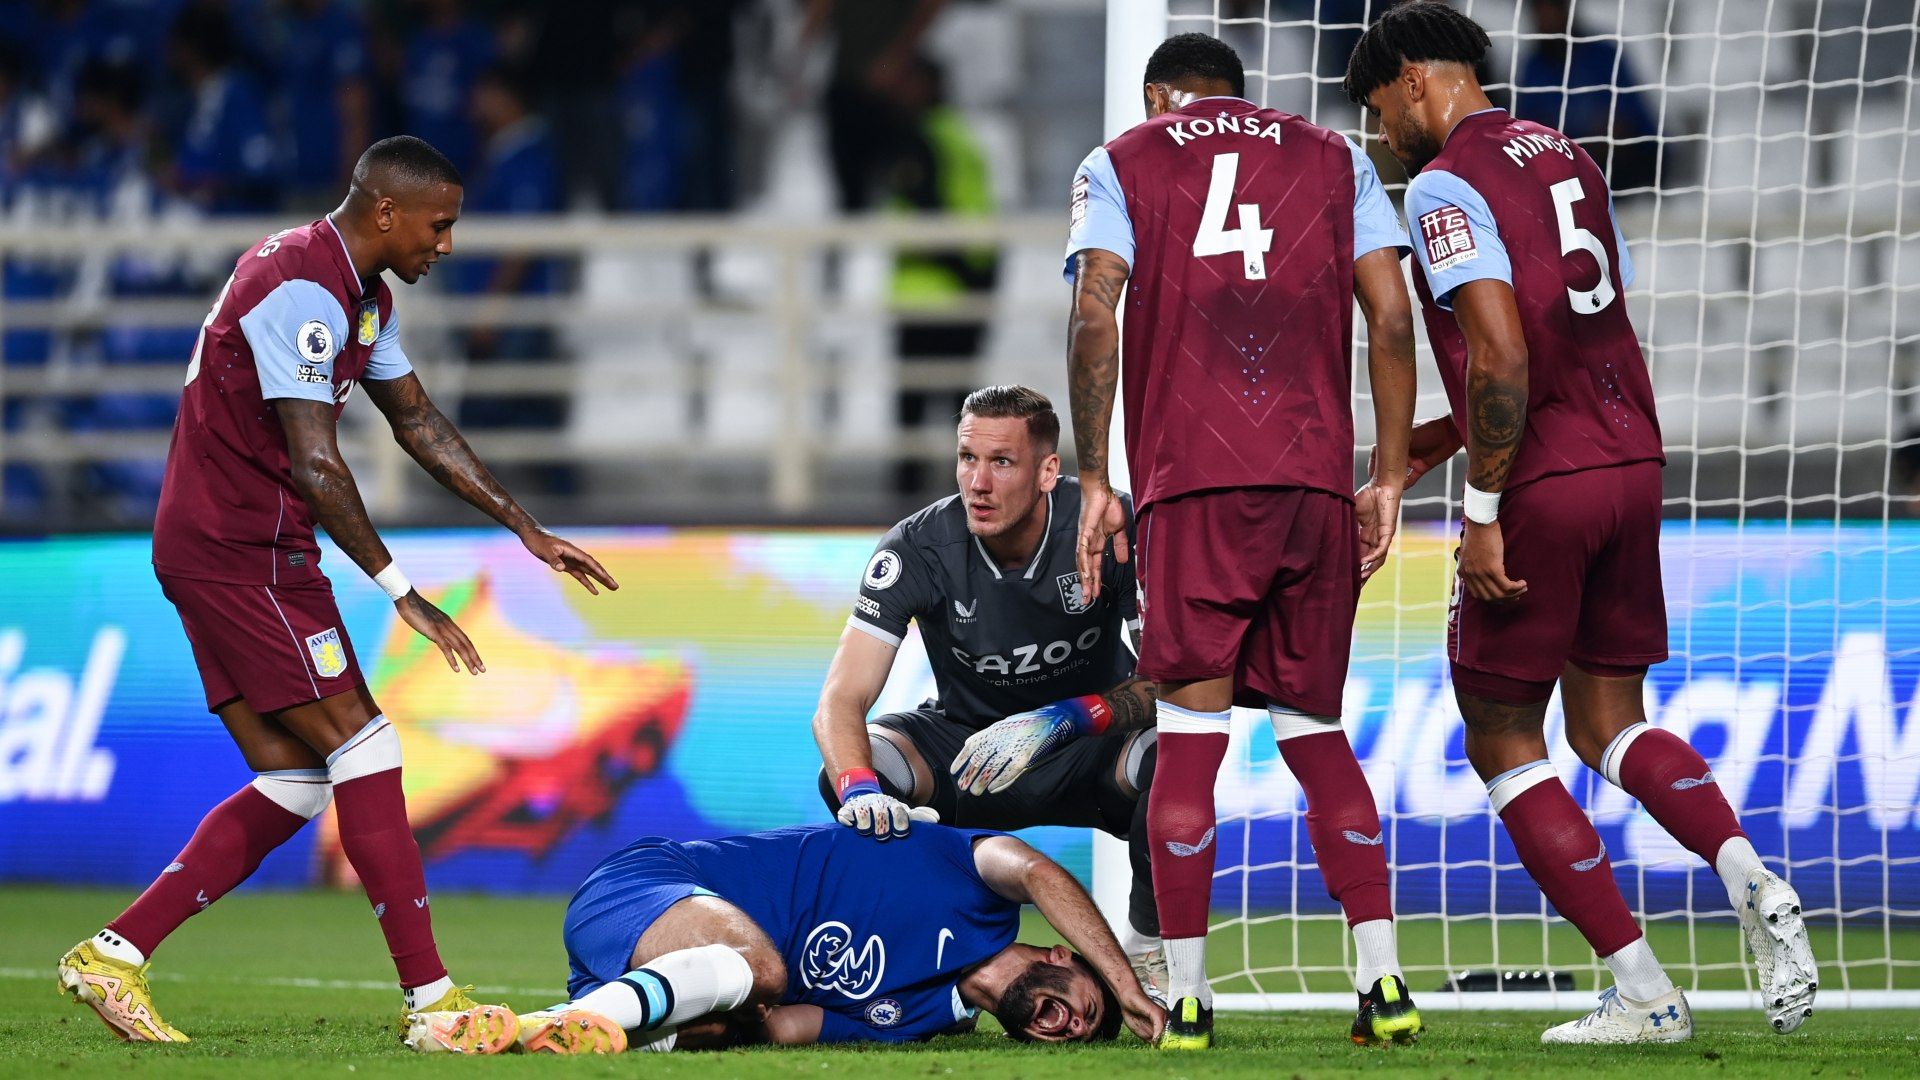 The Chelsea striker went down in pain during the first half of their midseason friendly match against Aston Villa on Sunday.